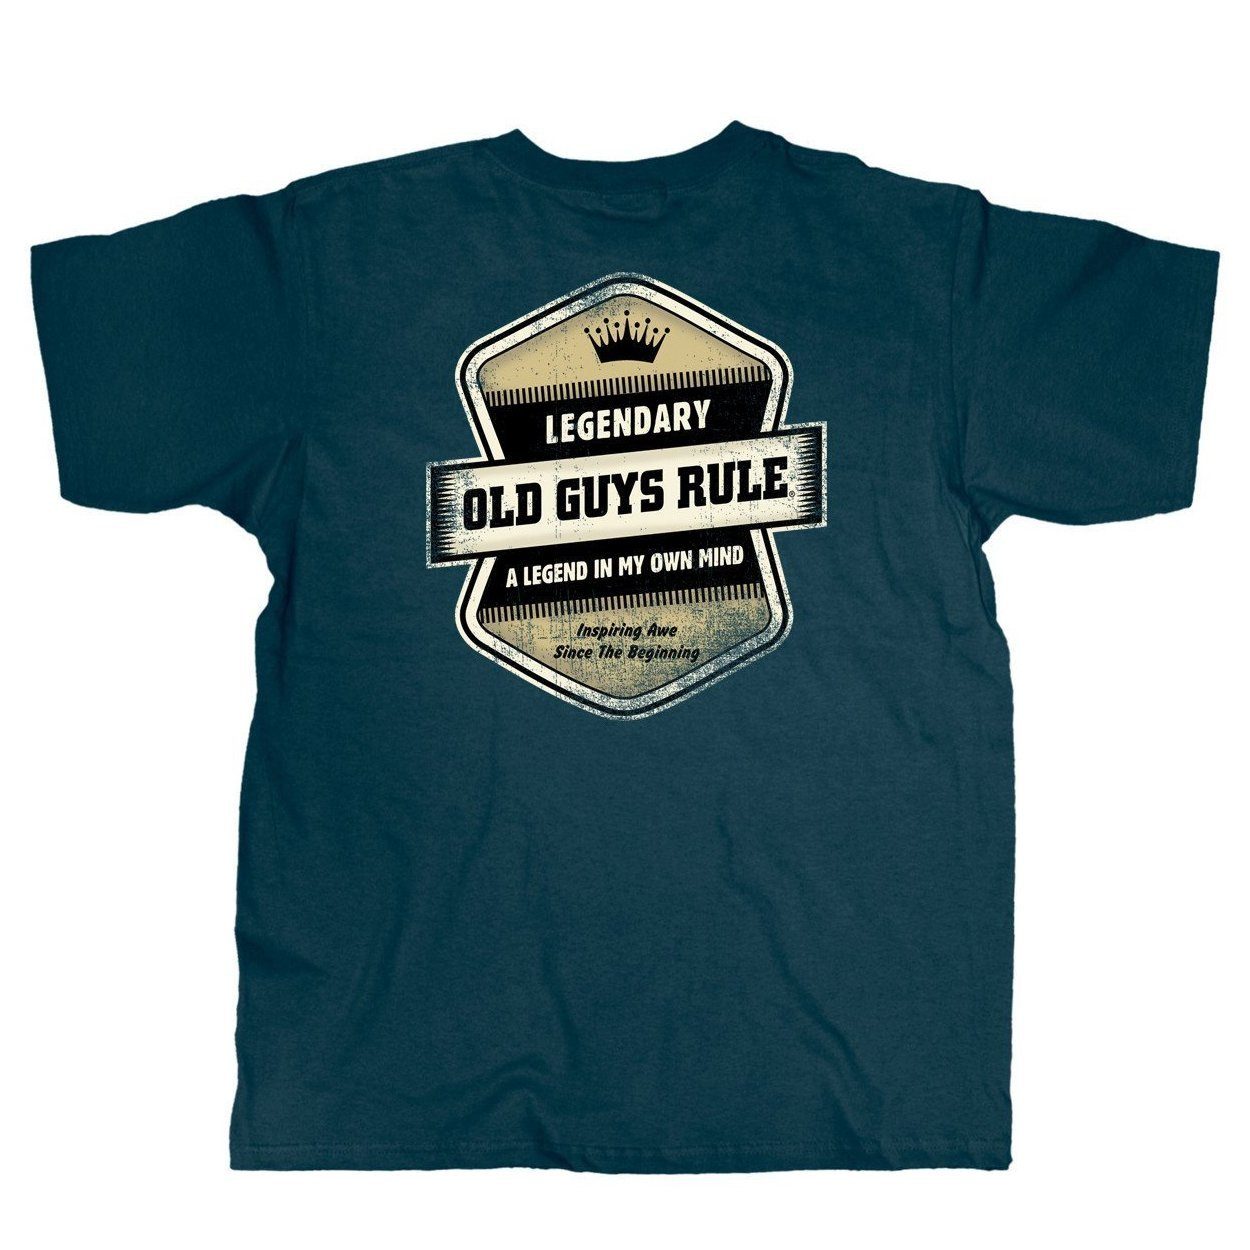 Old Guys Rule - Legend Badge  - Harbor Blue T-Shirt - Main View